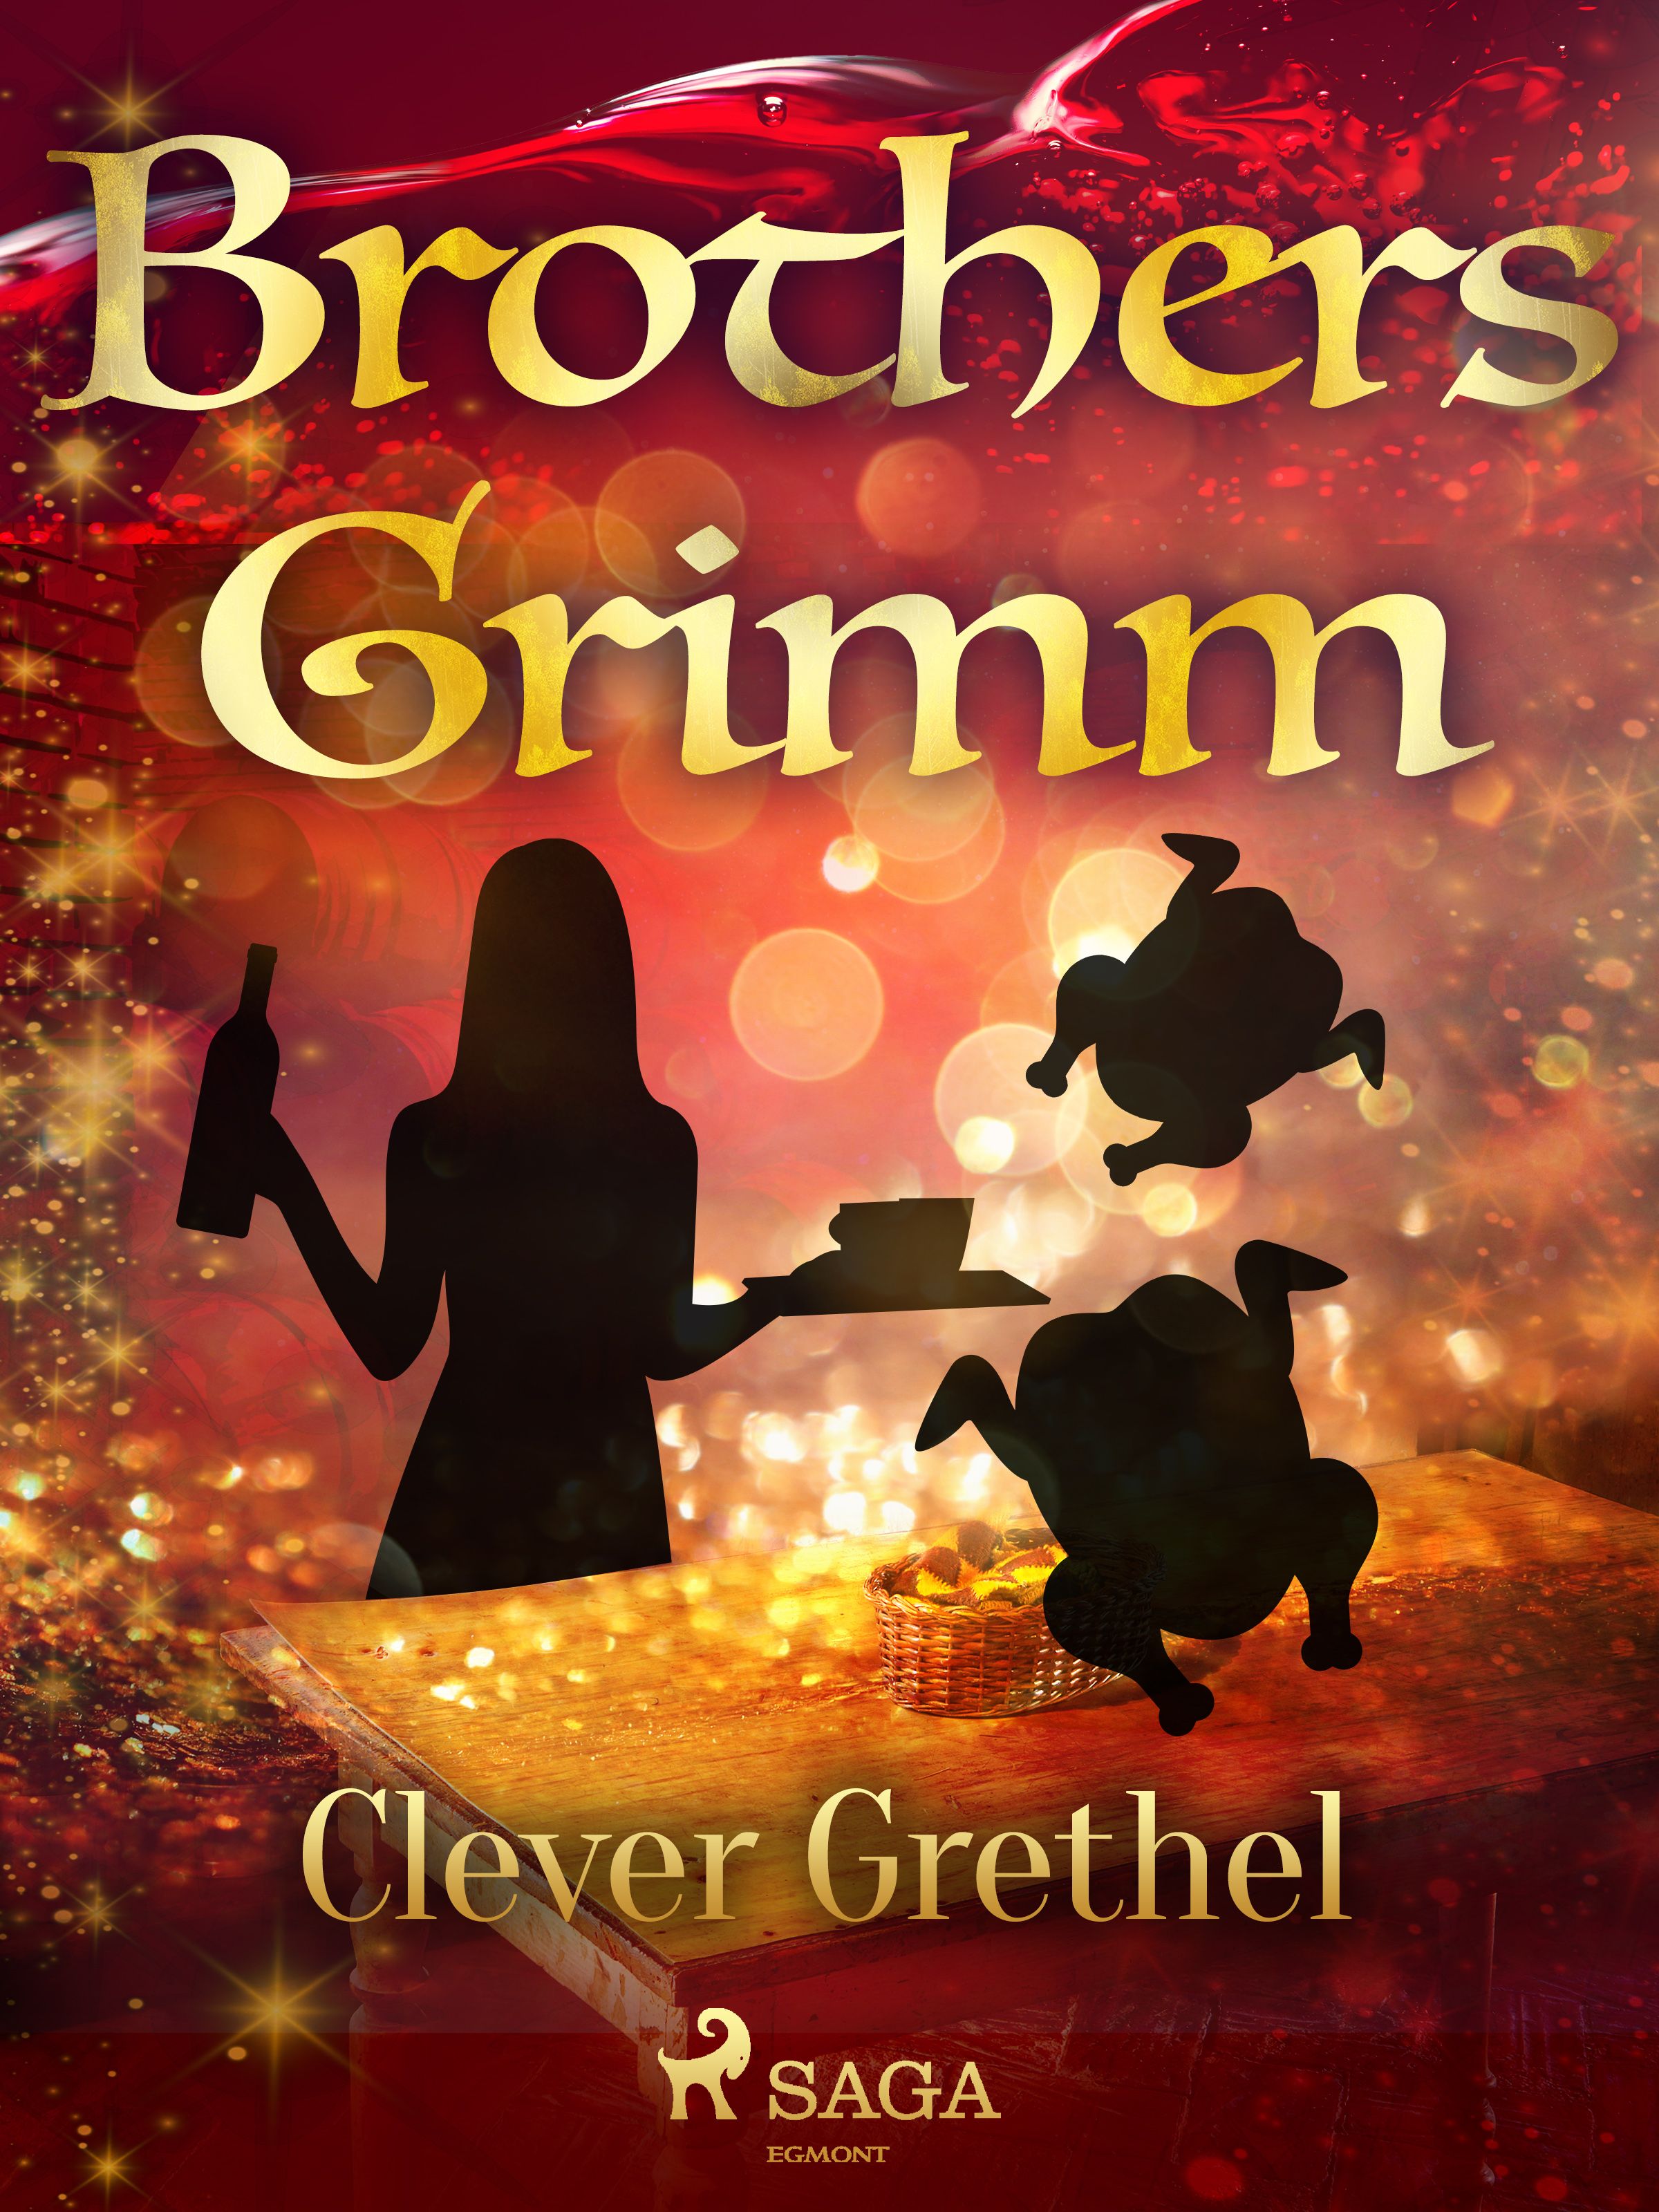 Clever Grethel, eBook by Brothers Grimm